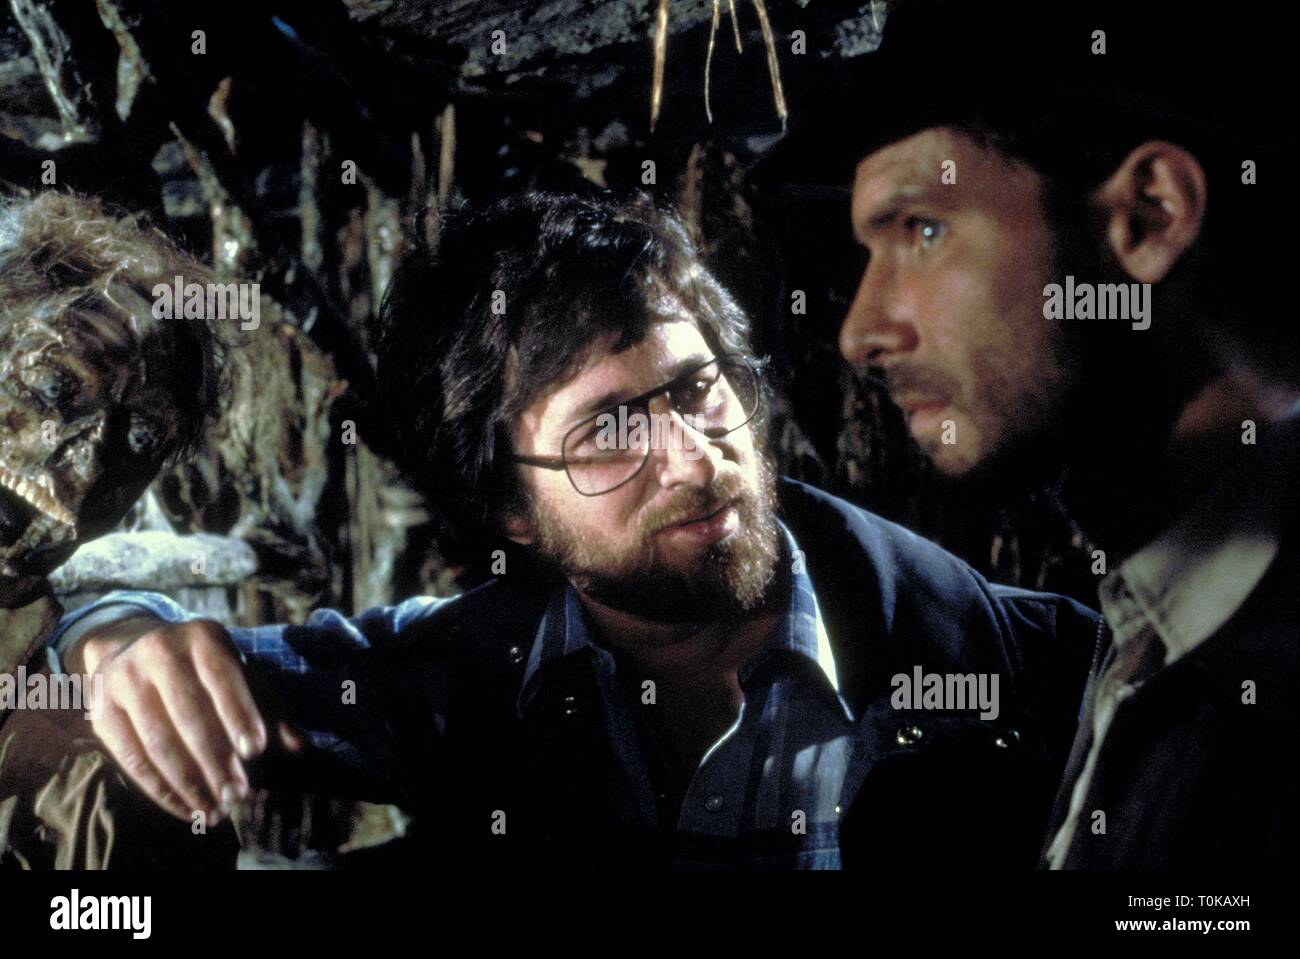 STEVEN SPIELBERG, HARRISON FORD, INDIANA JONES AND THE RAIDERS OF THE LOST ARK, 1981 Stock Photo